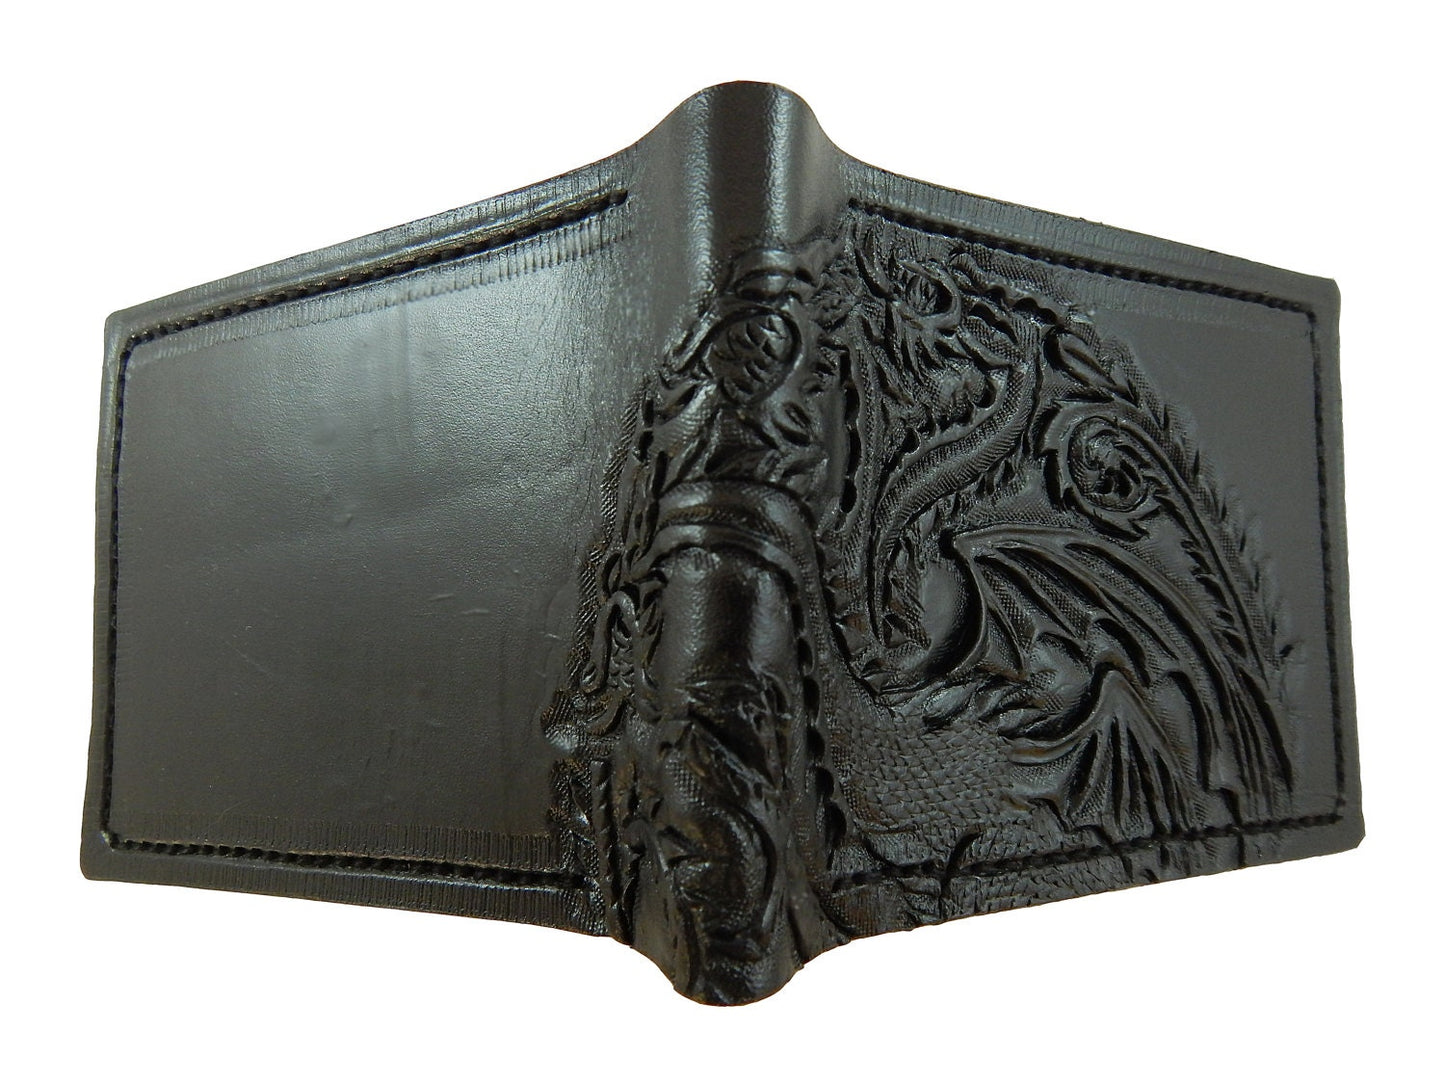 Black Targaryen leather wallet- Leather Bifold Wallet - Handcrafted Game of Thrones inspired Wallet -